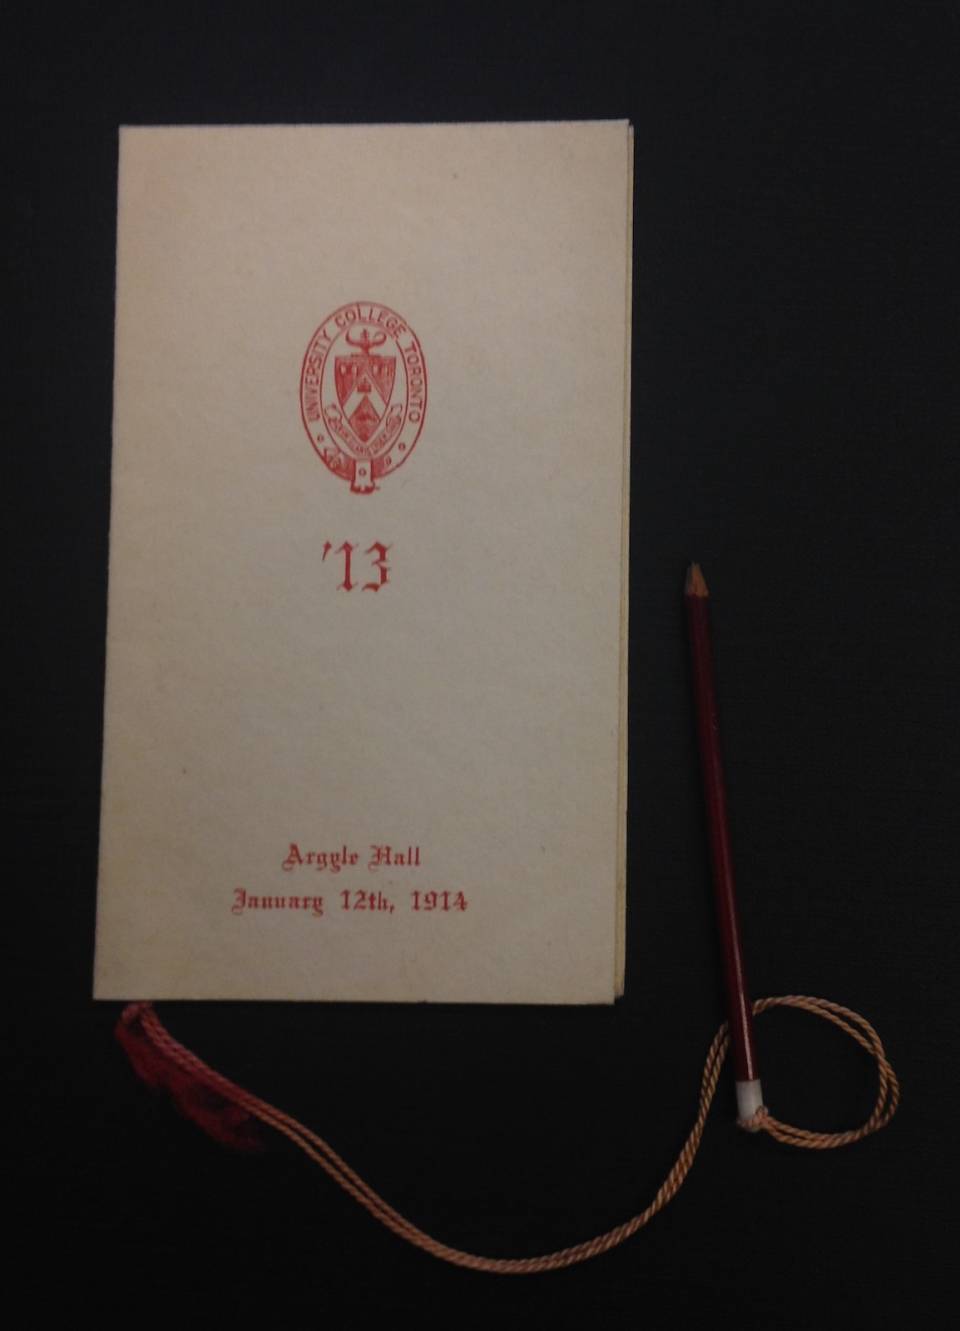 Front cover of a dance card with University College logo and the words "Argyle Hall, January 12th, 1914"